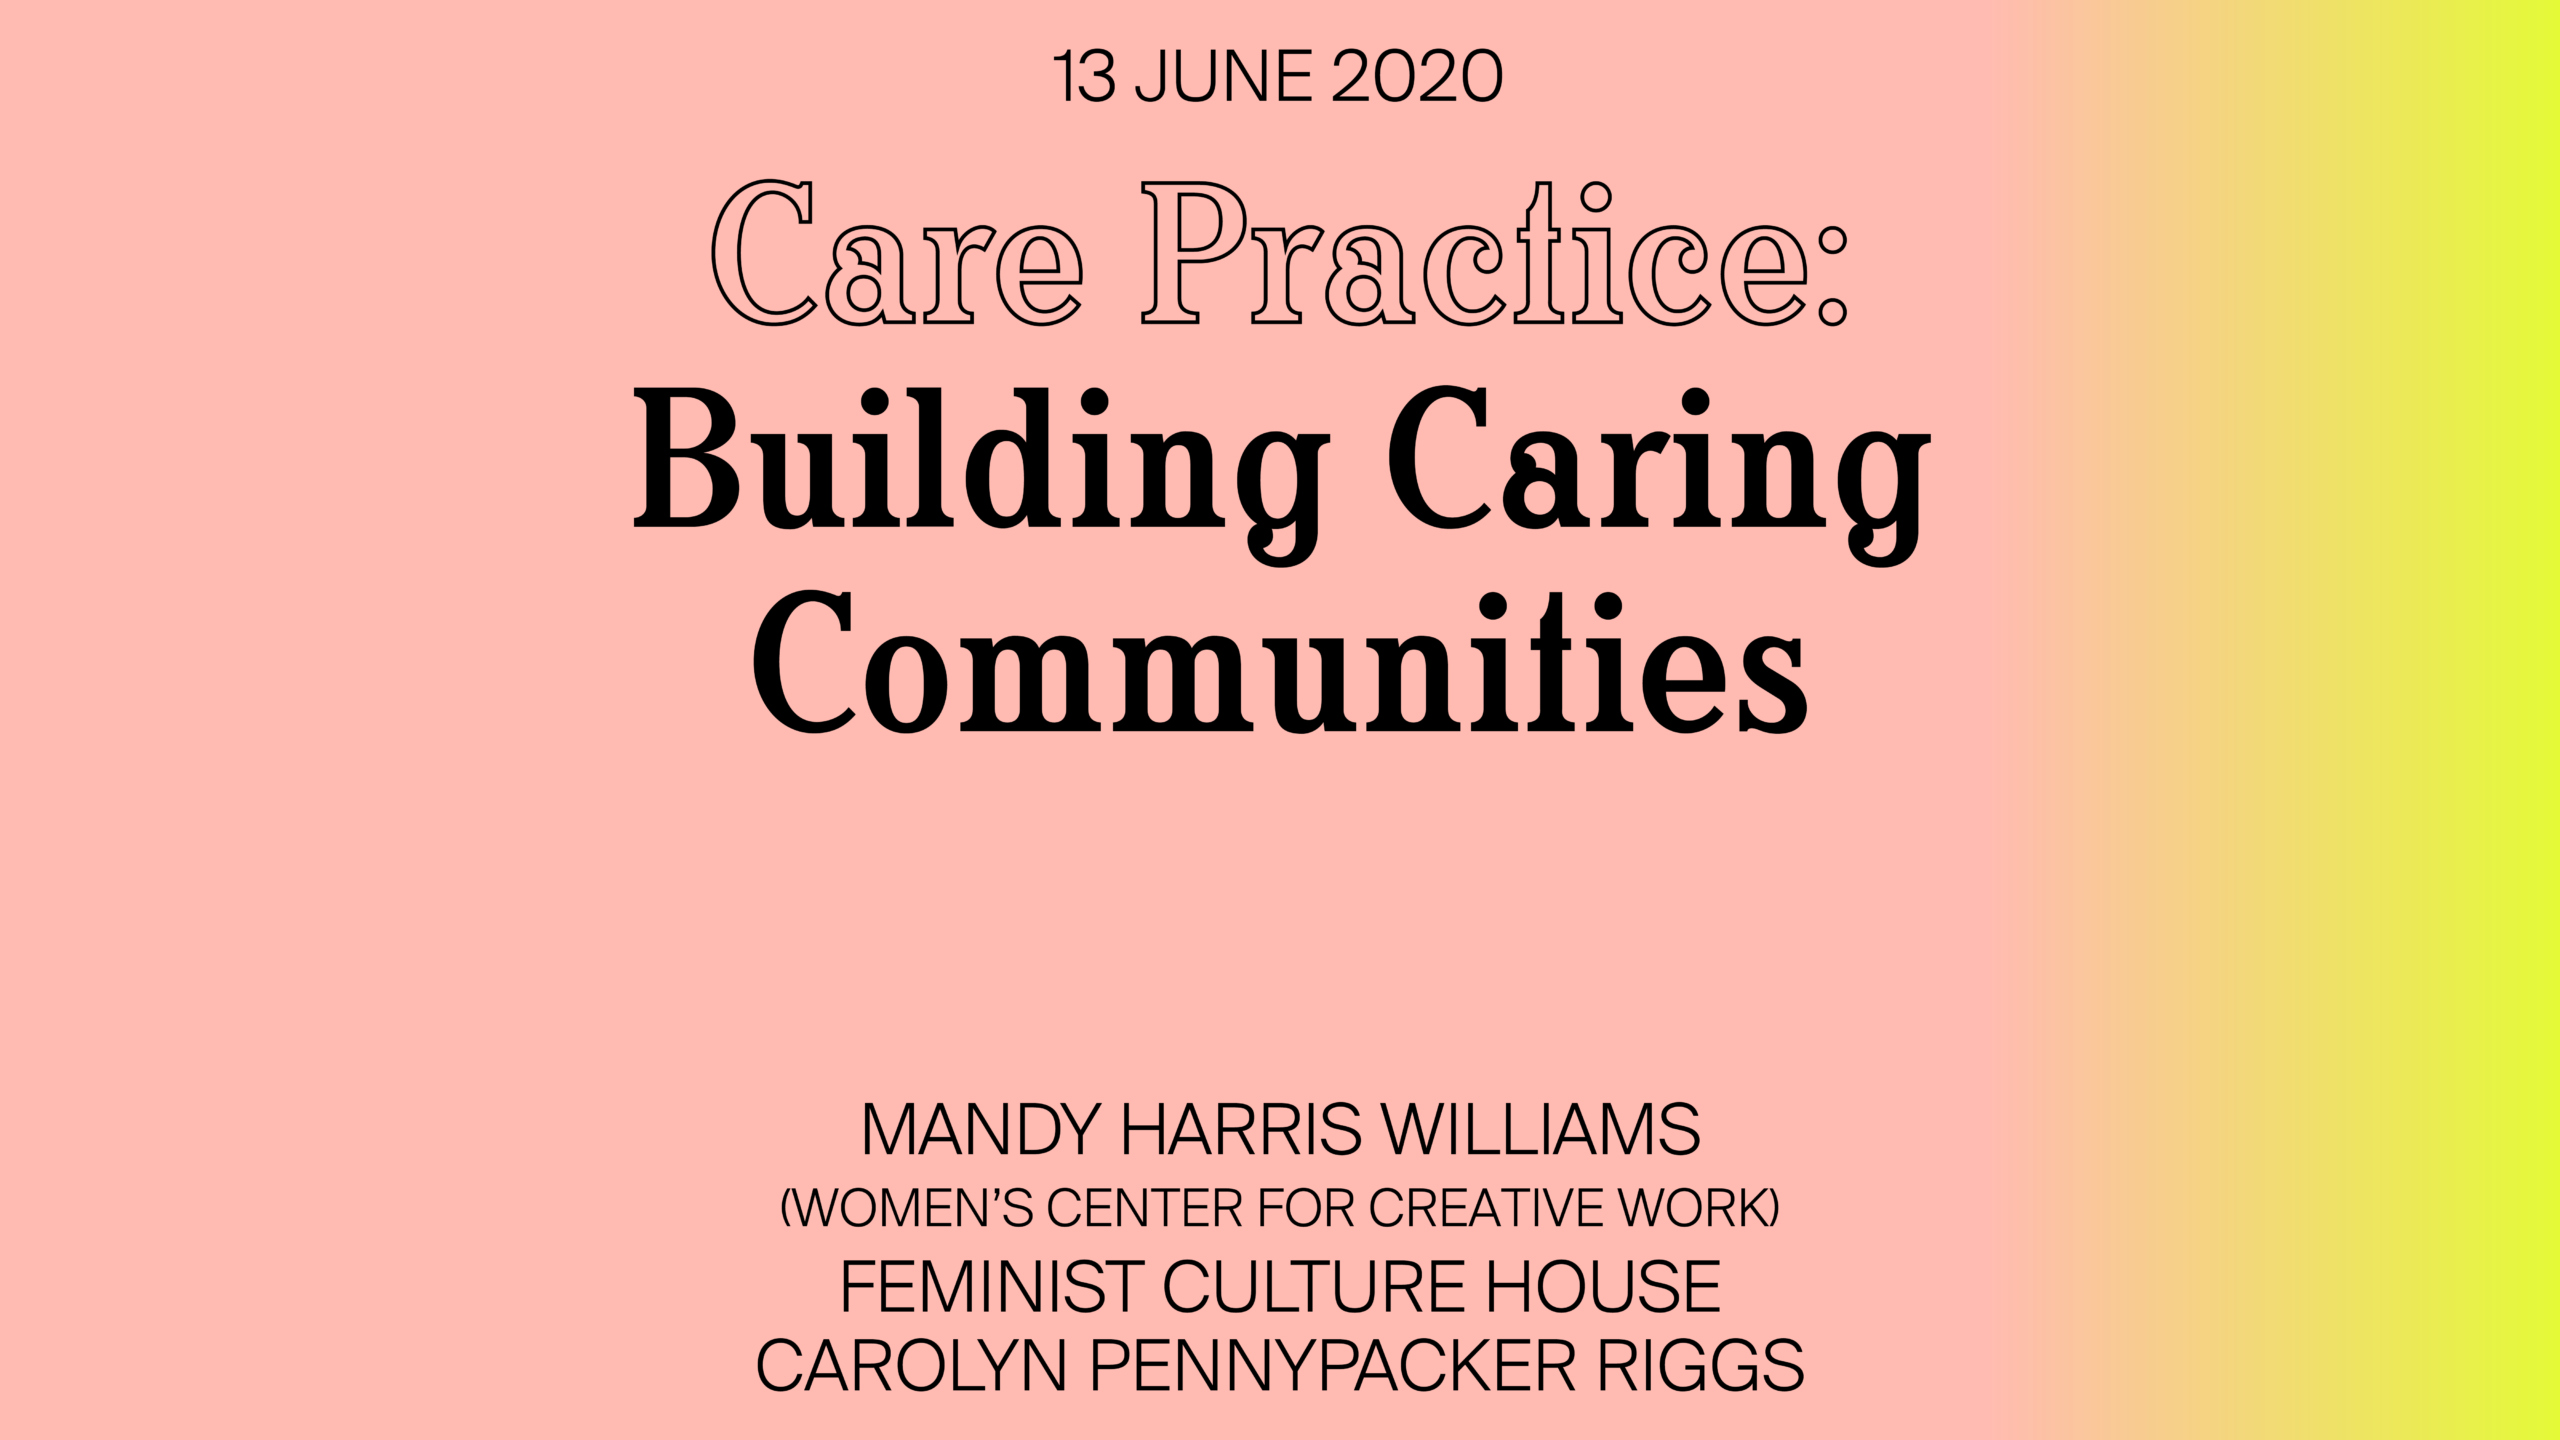 Care Practice: Recipes for Resilience